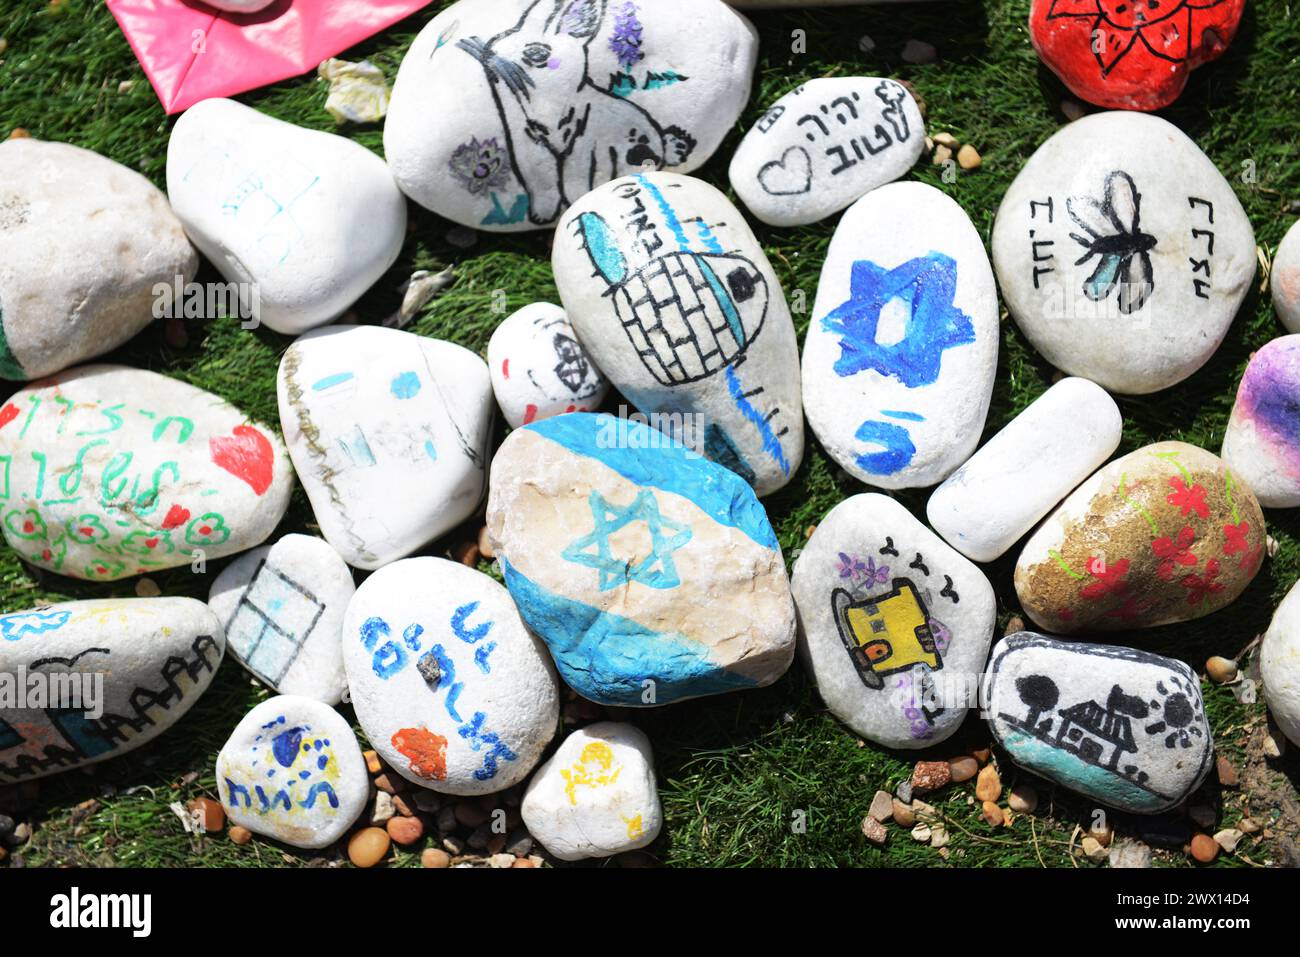 Stones with drawings and messages for the hostages in Gaza. Hostages Square, Tel-Aviv, Israel. Stock Photo